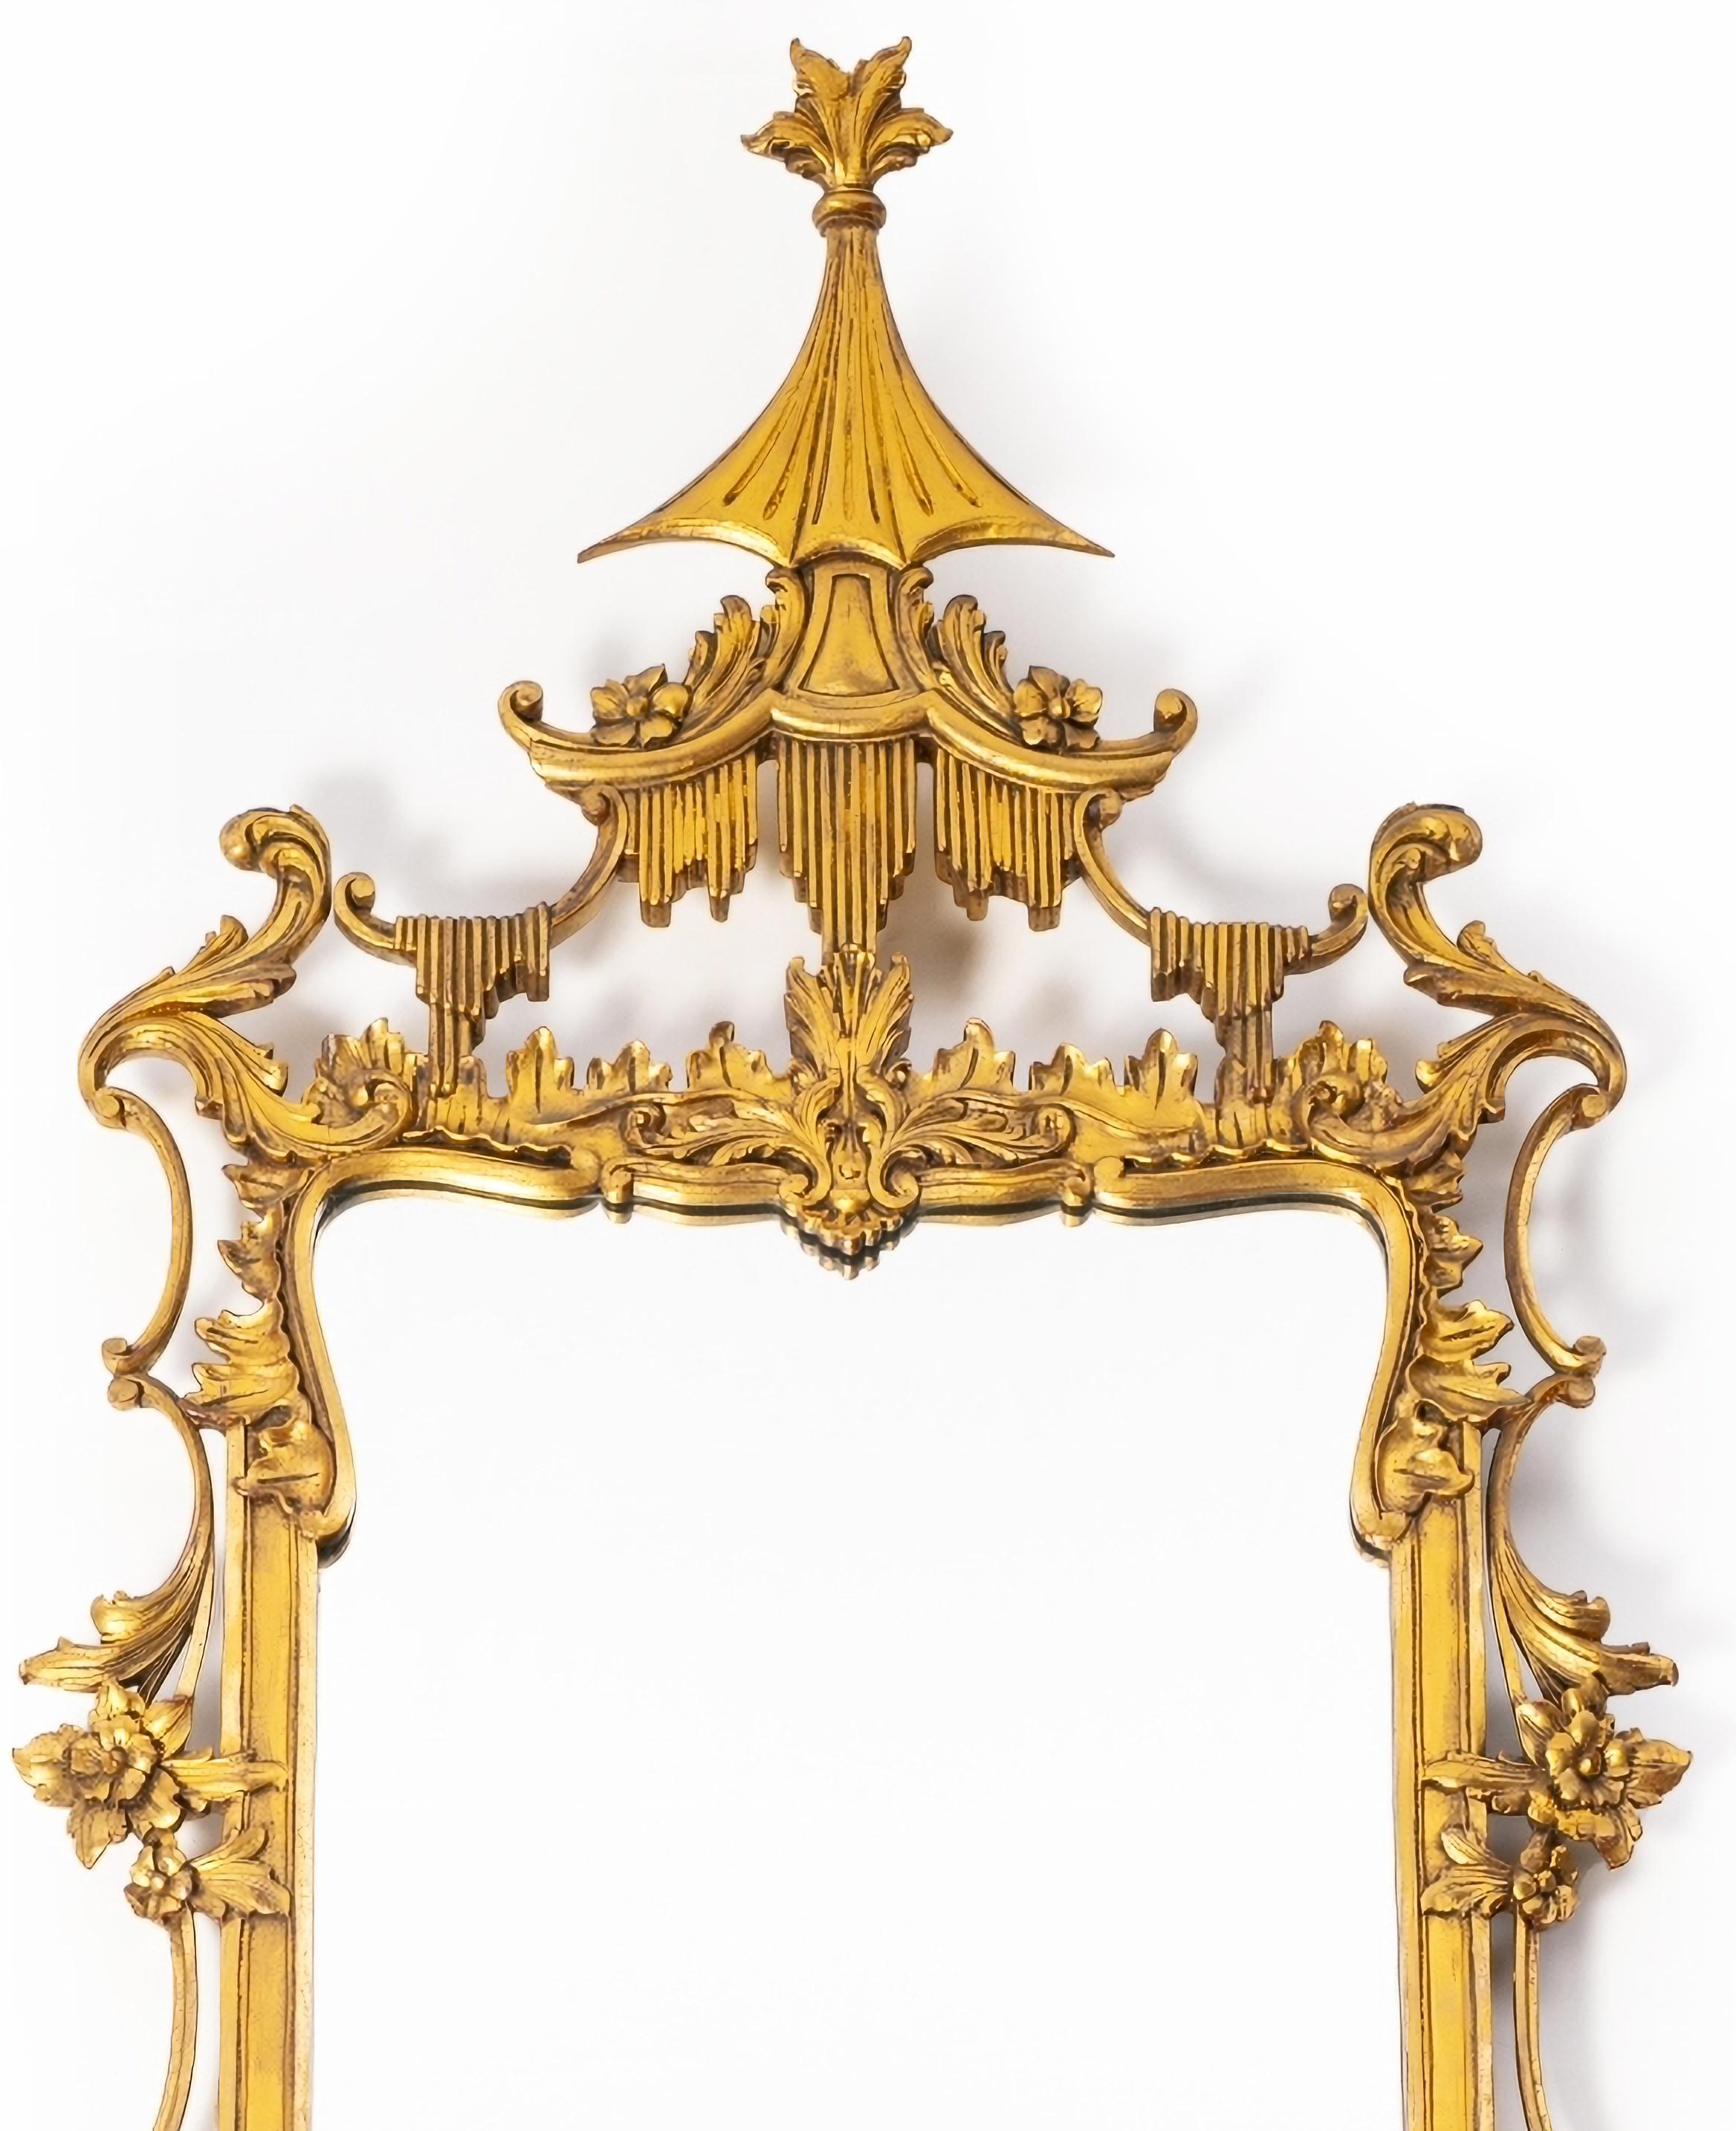 FRENCH WALL MIRROR 20th Century

in carved, pierced and gilded wood, decorated with plant motifs.
Usage signs.
Dim.: 135 x 64 cm
good conditions